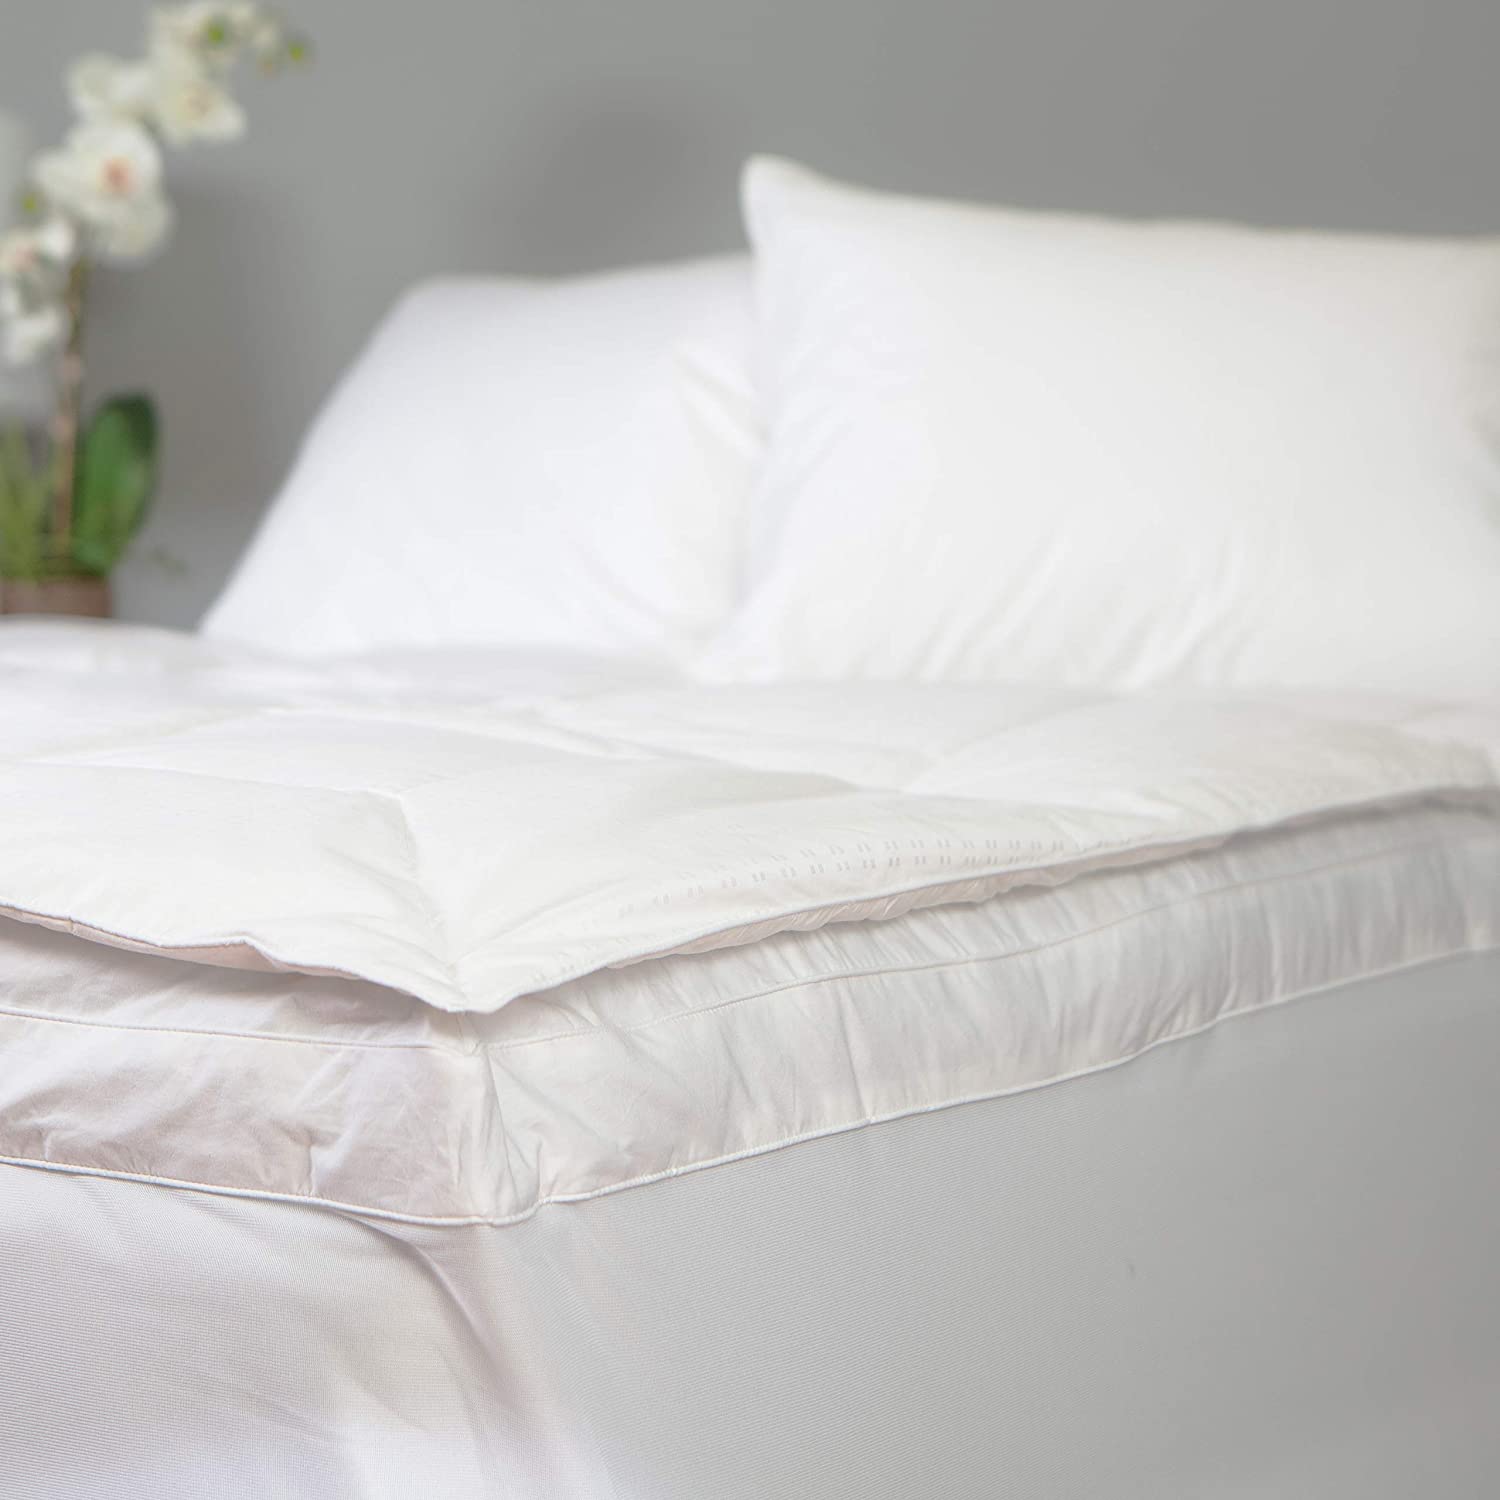 Allied Essentials Luxe Featherbed Mattress Topper